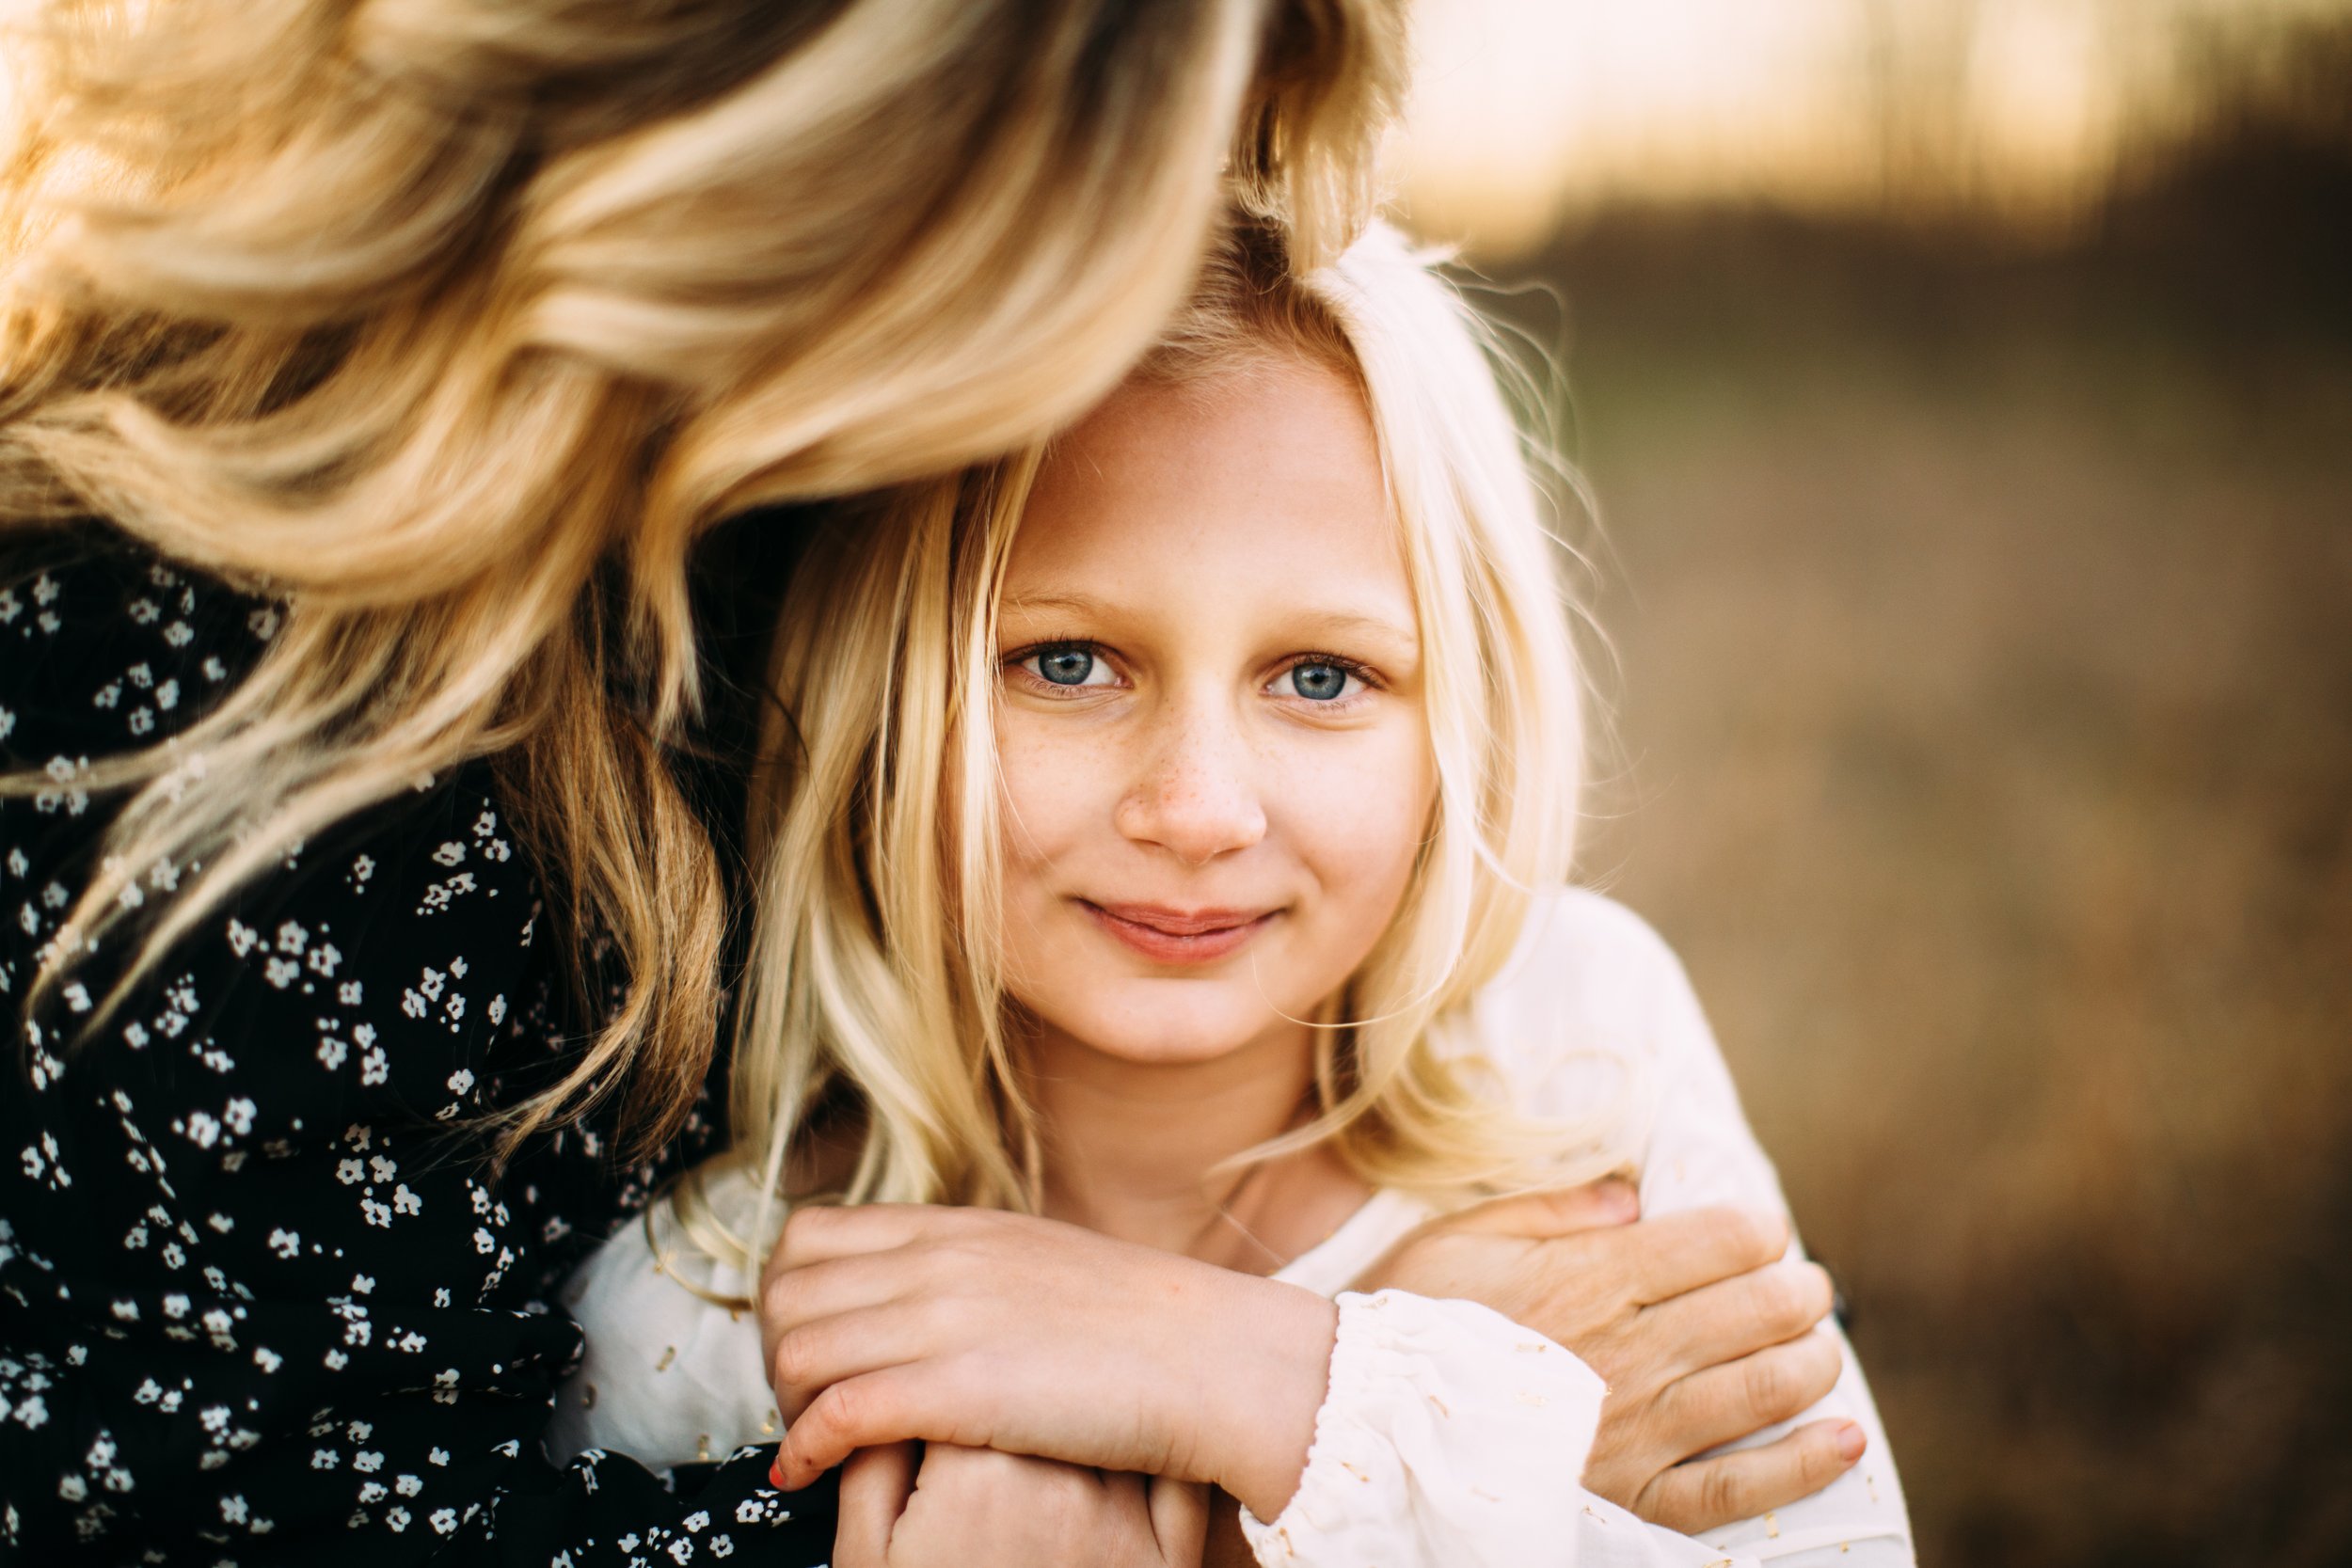  Close-up portrait of a young blonde girl during family pictures with Teala Ward Photography. daughter style ideas blonde child #TealaWardPhotography #TealaWardFamilies #StarvedRockStatePark #BuffaloRockPhotographers #UticaIllinoisphotographers 